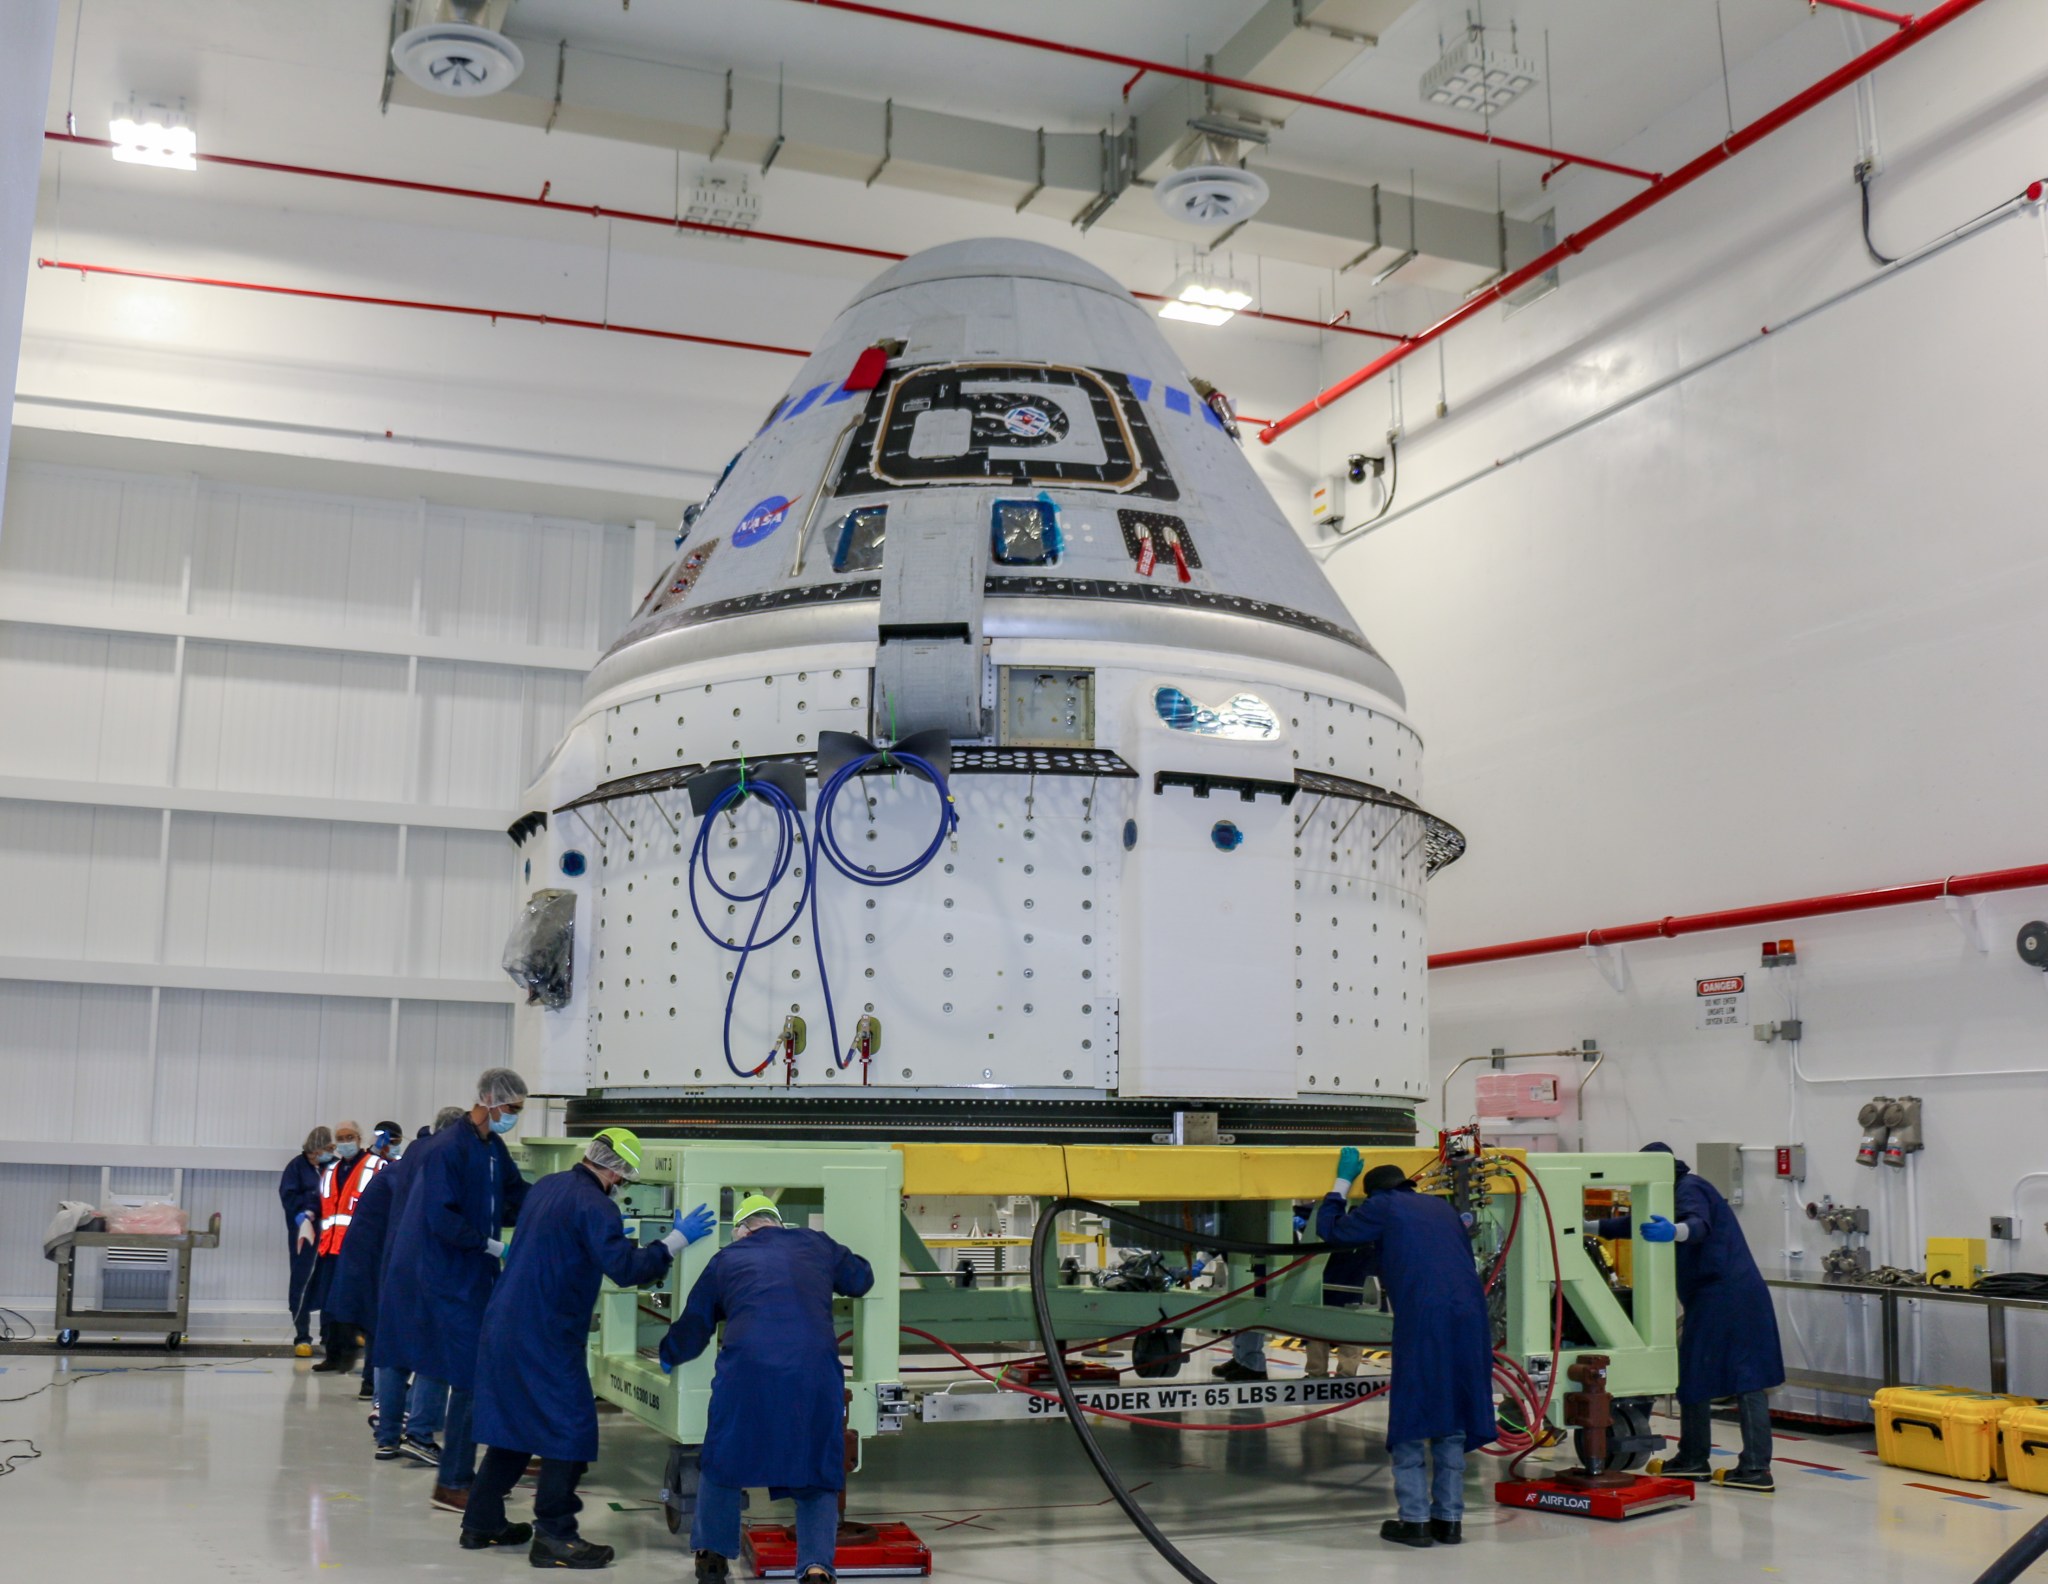 The Boeing CST-100 Starliner spacecraft to be flown on Orbital Flight Test-2 (OFT-2) is seen in the Commercial Crew and Cargo Processing Facility at NASA’s Kennedy Space Center in Florida on June 2, 2021.